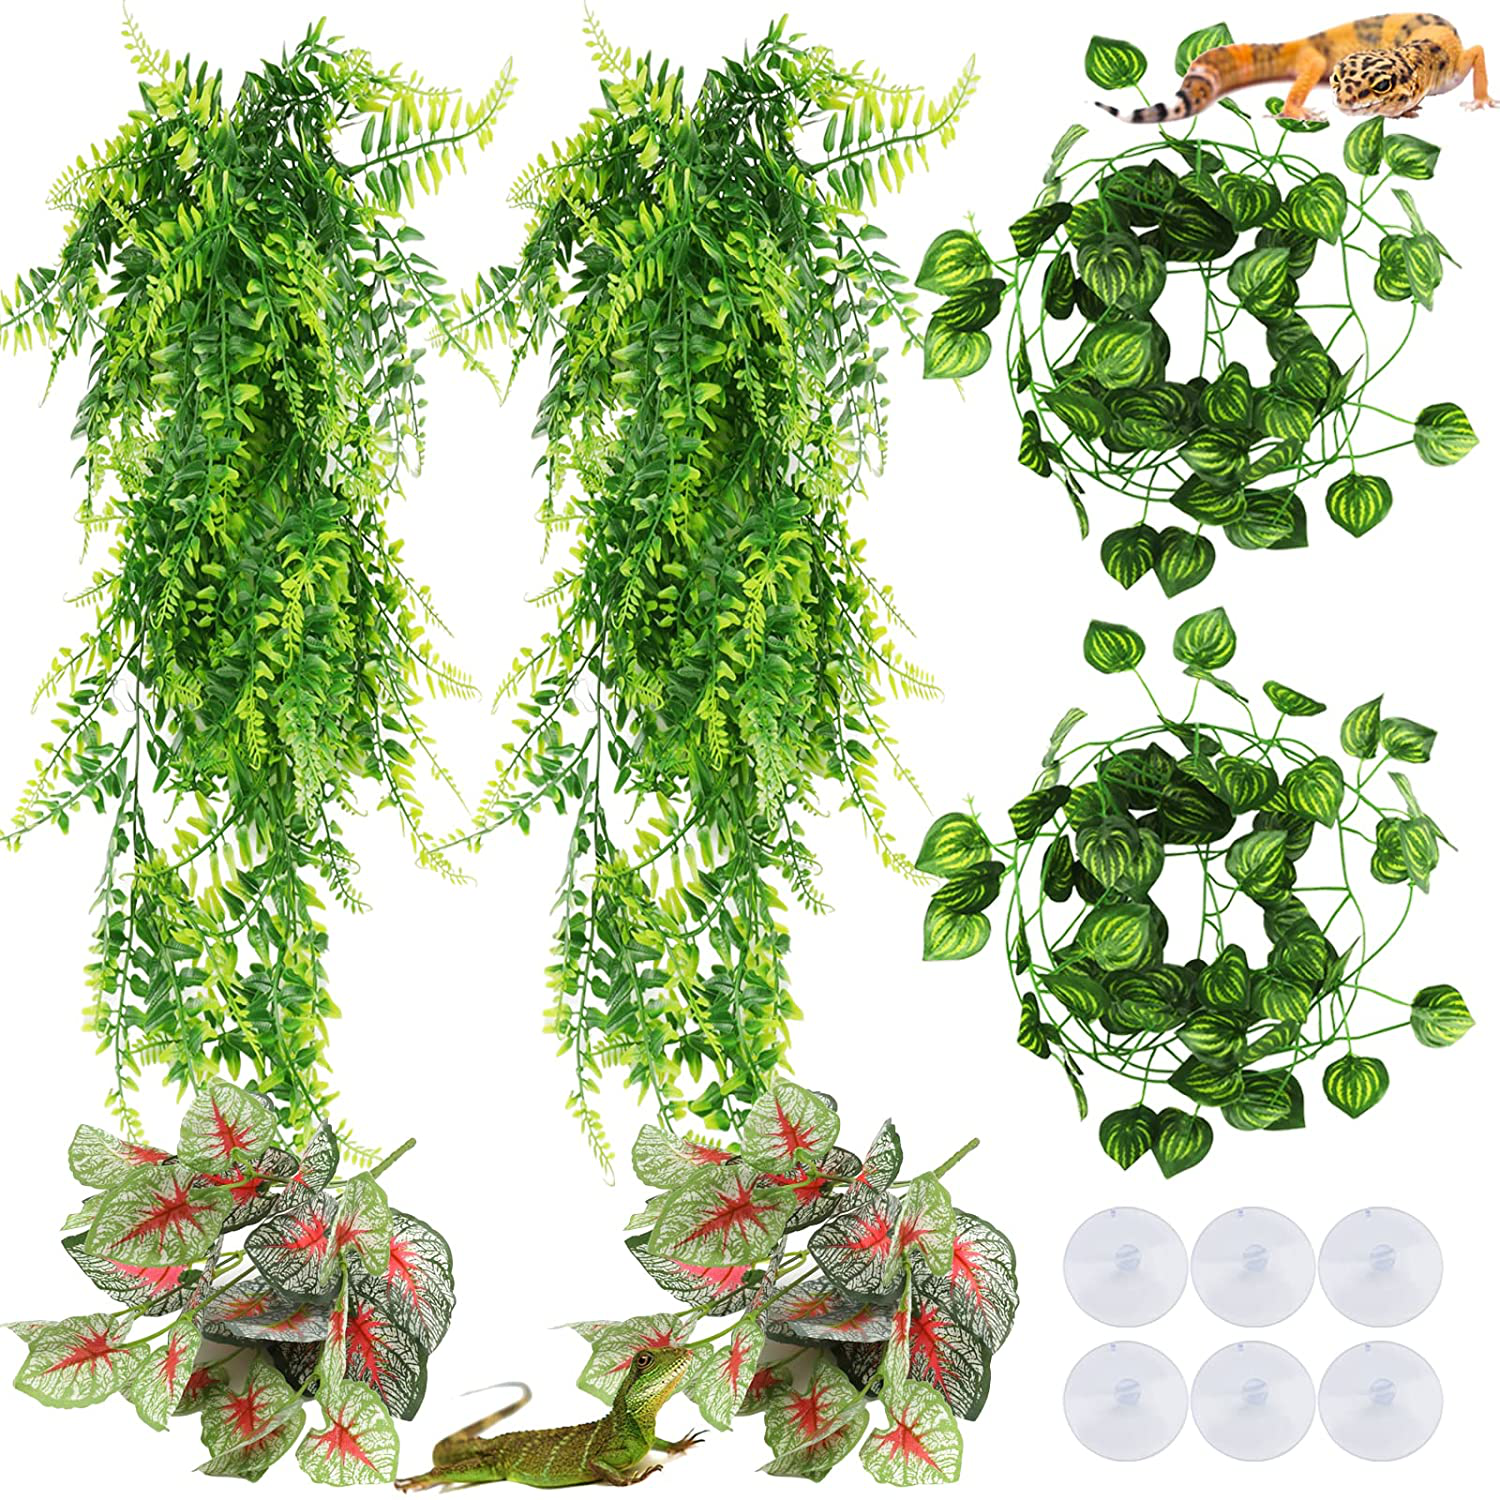 Pietypet Reptile Lizard Habitat Decor Accessories, Bearded Dragon Hammock, Reptile Hammock with Artificial Climbing Vines and Plants for Chameleon, Lizards, Gecko, Snakes, Lguana Animals & Pet Supplies > Pet Supplies > Reptile & Amphibian Supplies > Reptile & Amphibian Habitats PietyPet 2 large hanging plant with vines  